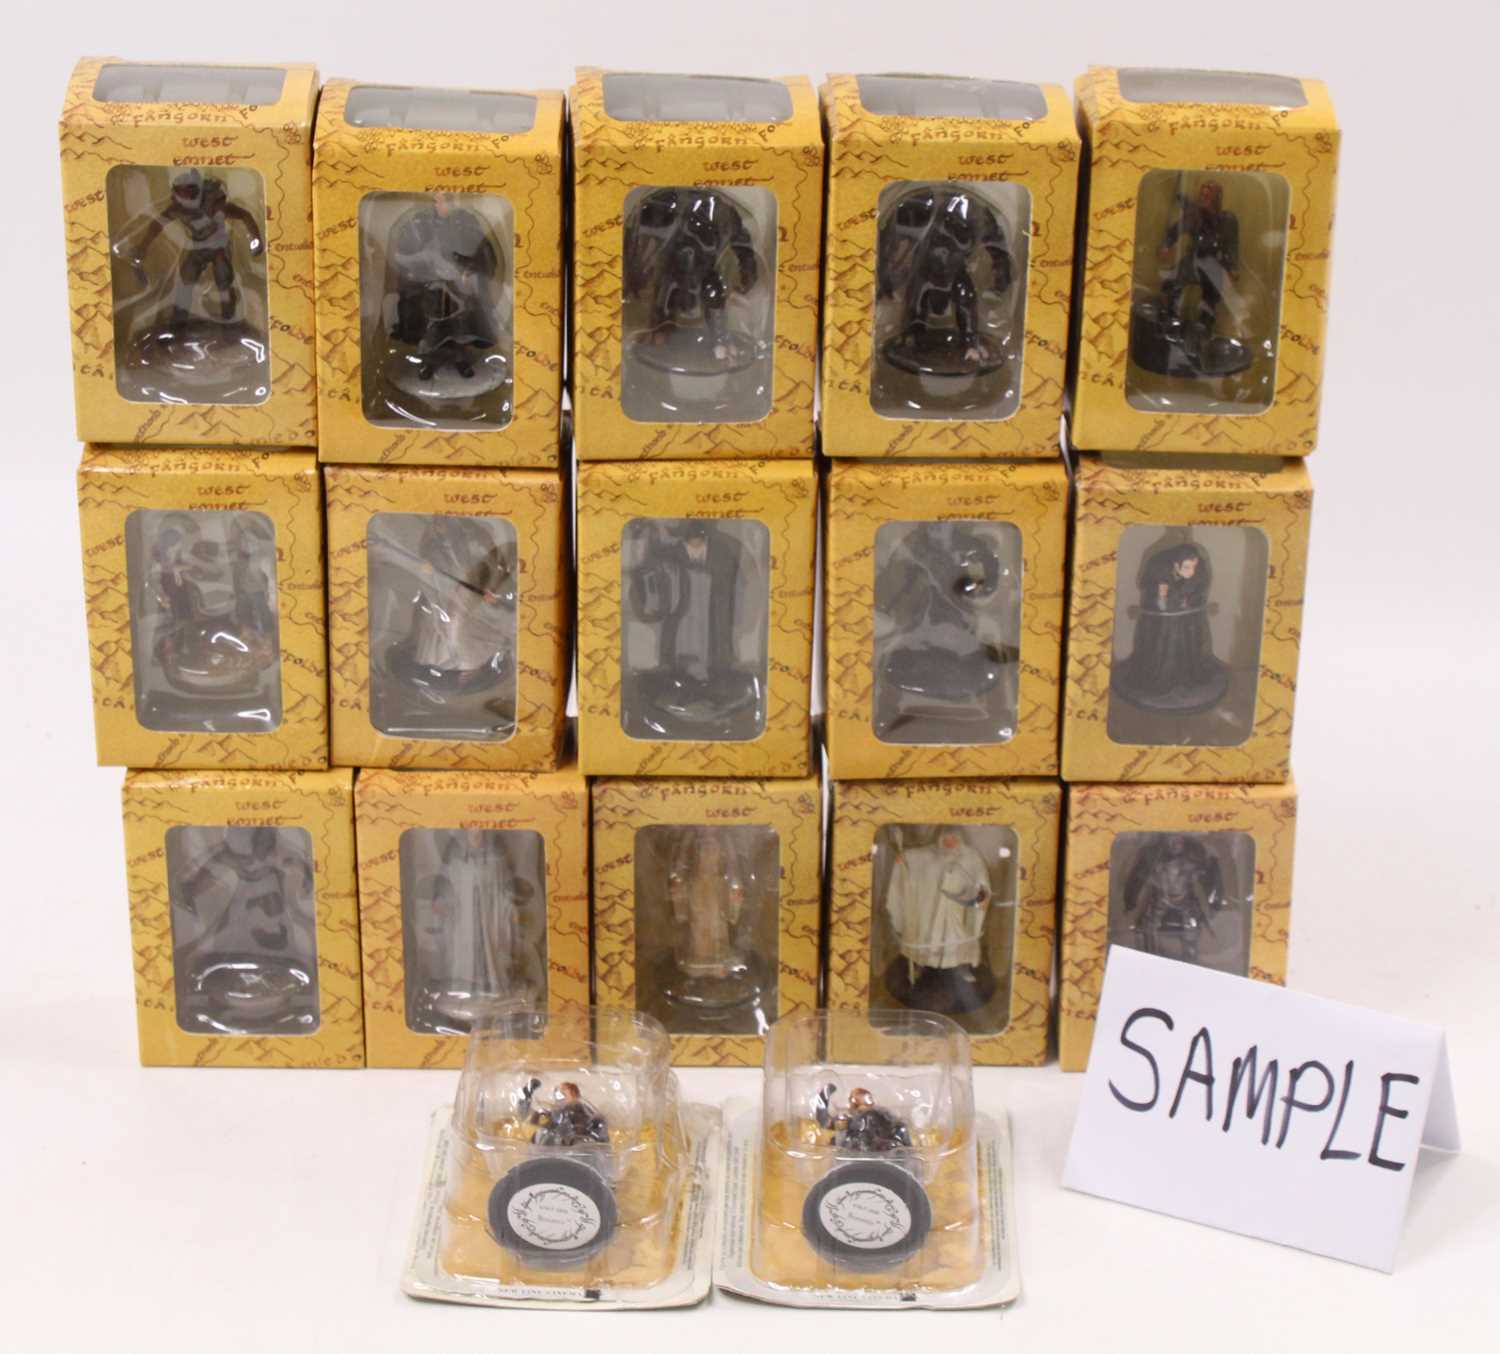 Eaglemoss Collection of 180 various Lord of The Rings white metal hand painted figures, complete set